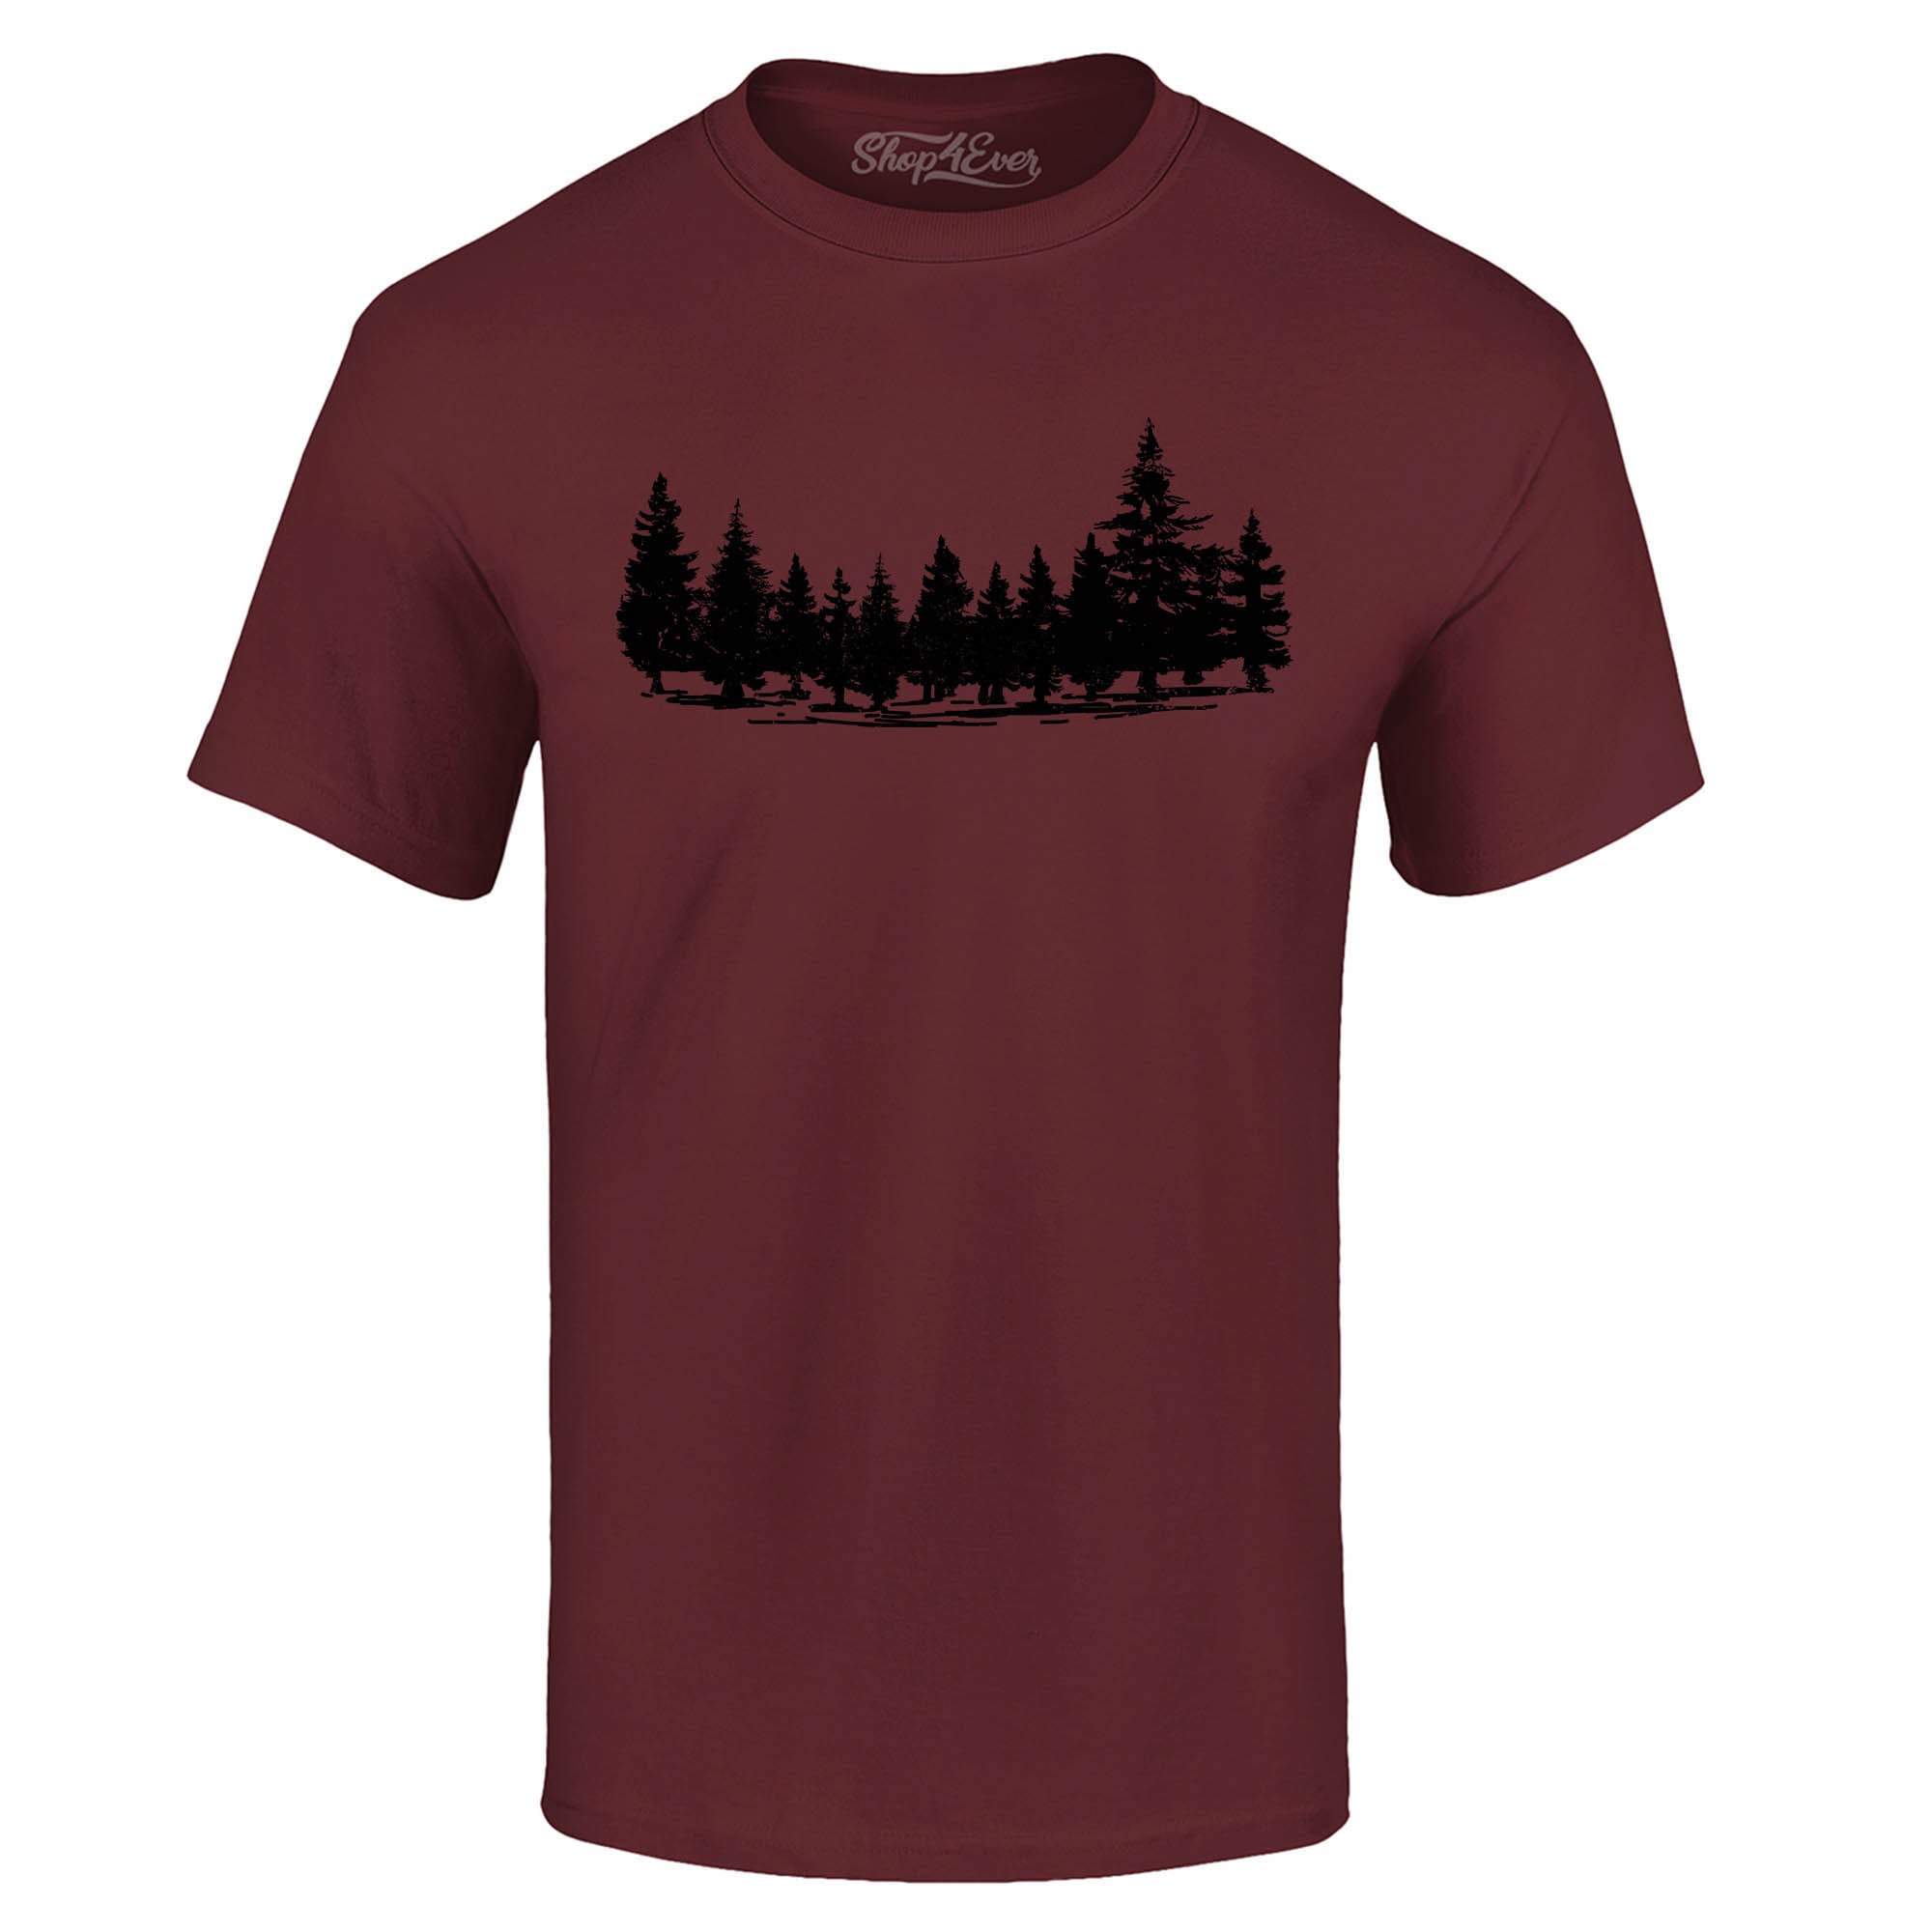 Forest Trees Nature Mountains Wildlife T-Shirt